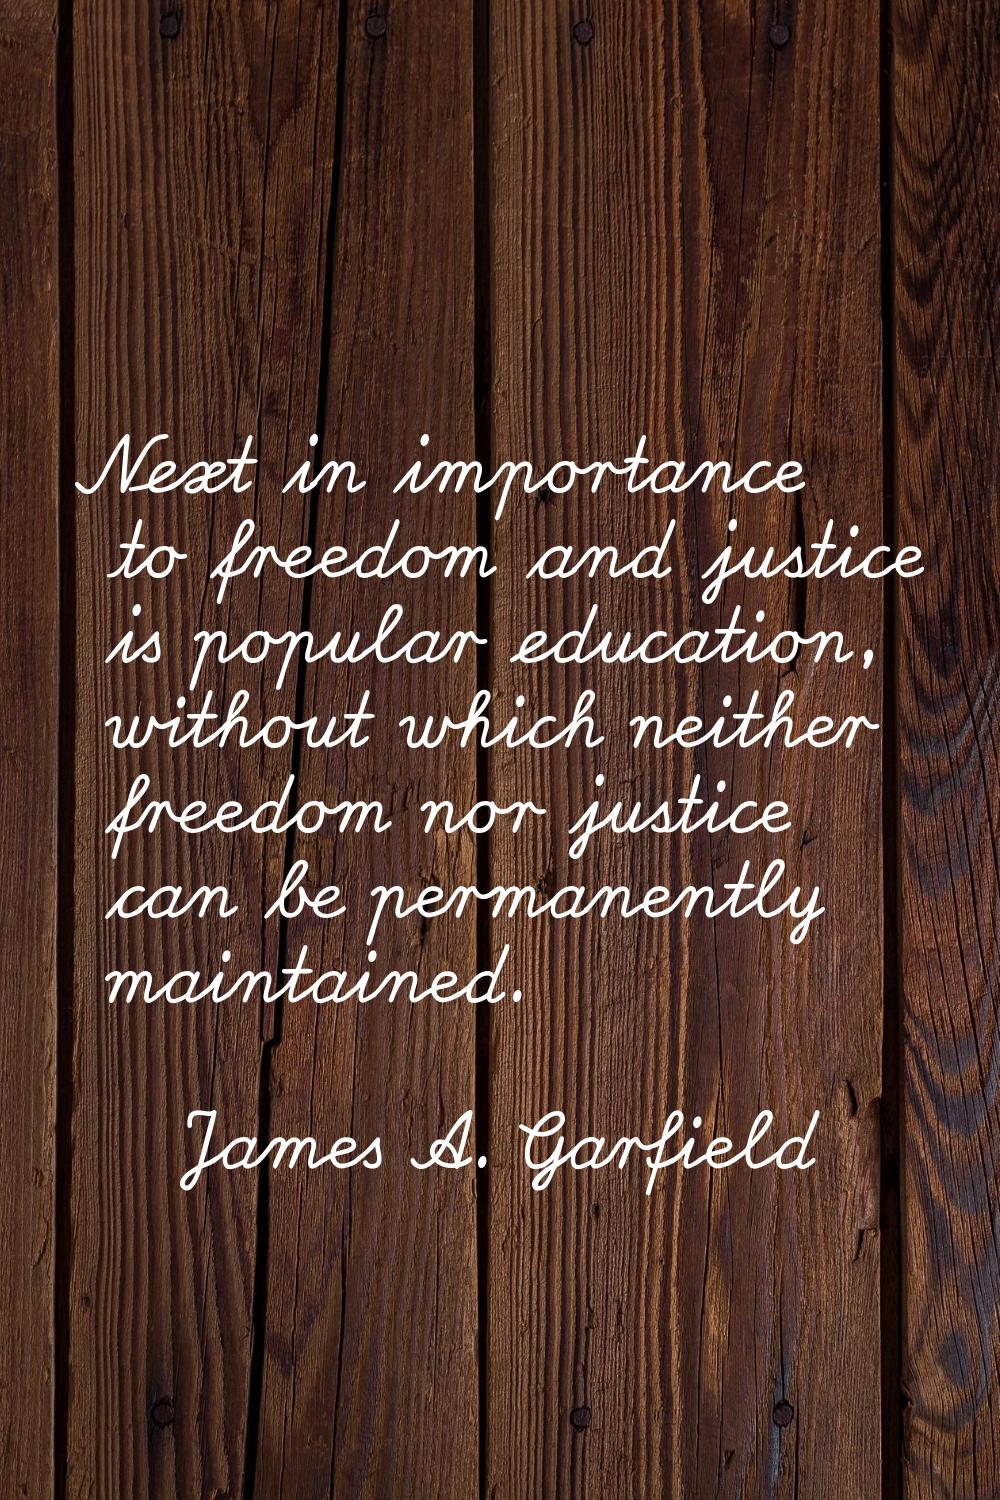 Next in importance to freedom and justice is popular education, without which neither freedom nor j